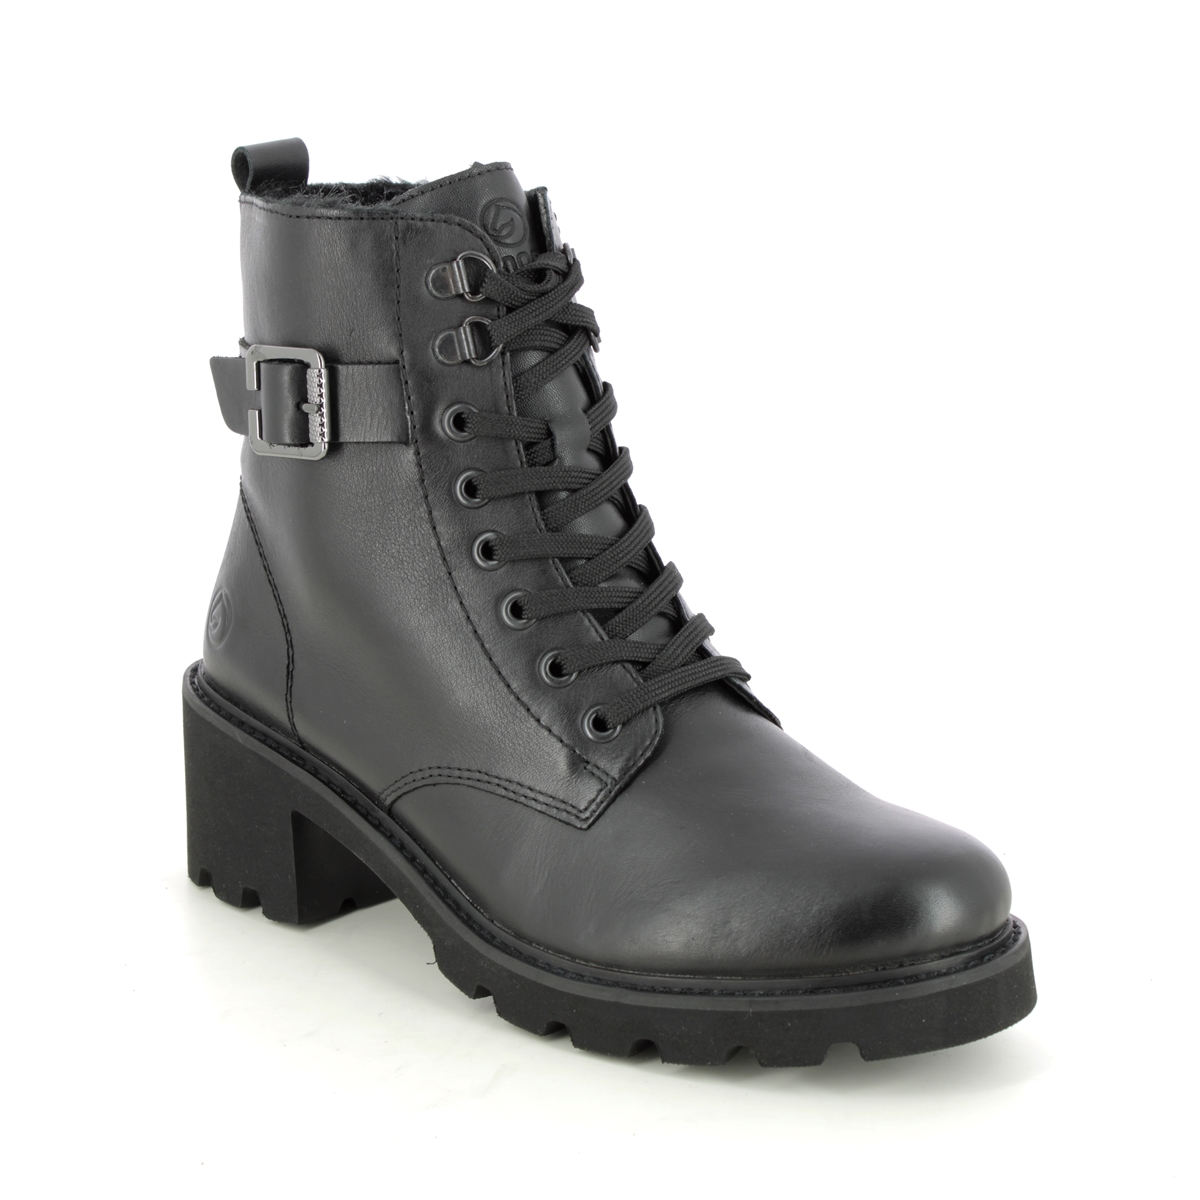 Remonte Bodola Black Leather Womens Lace Up Boots D0A74-01 In Size 37 In Plain Black Leather